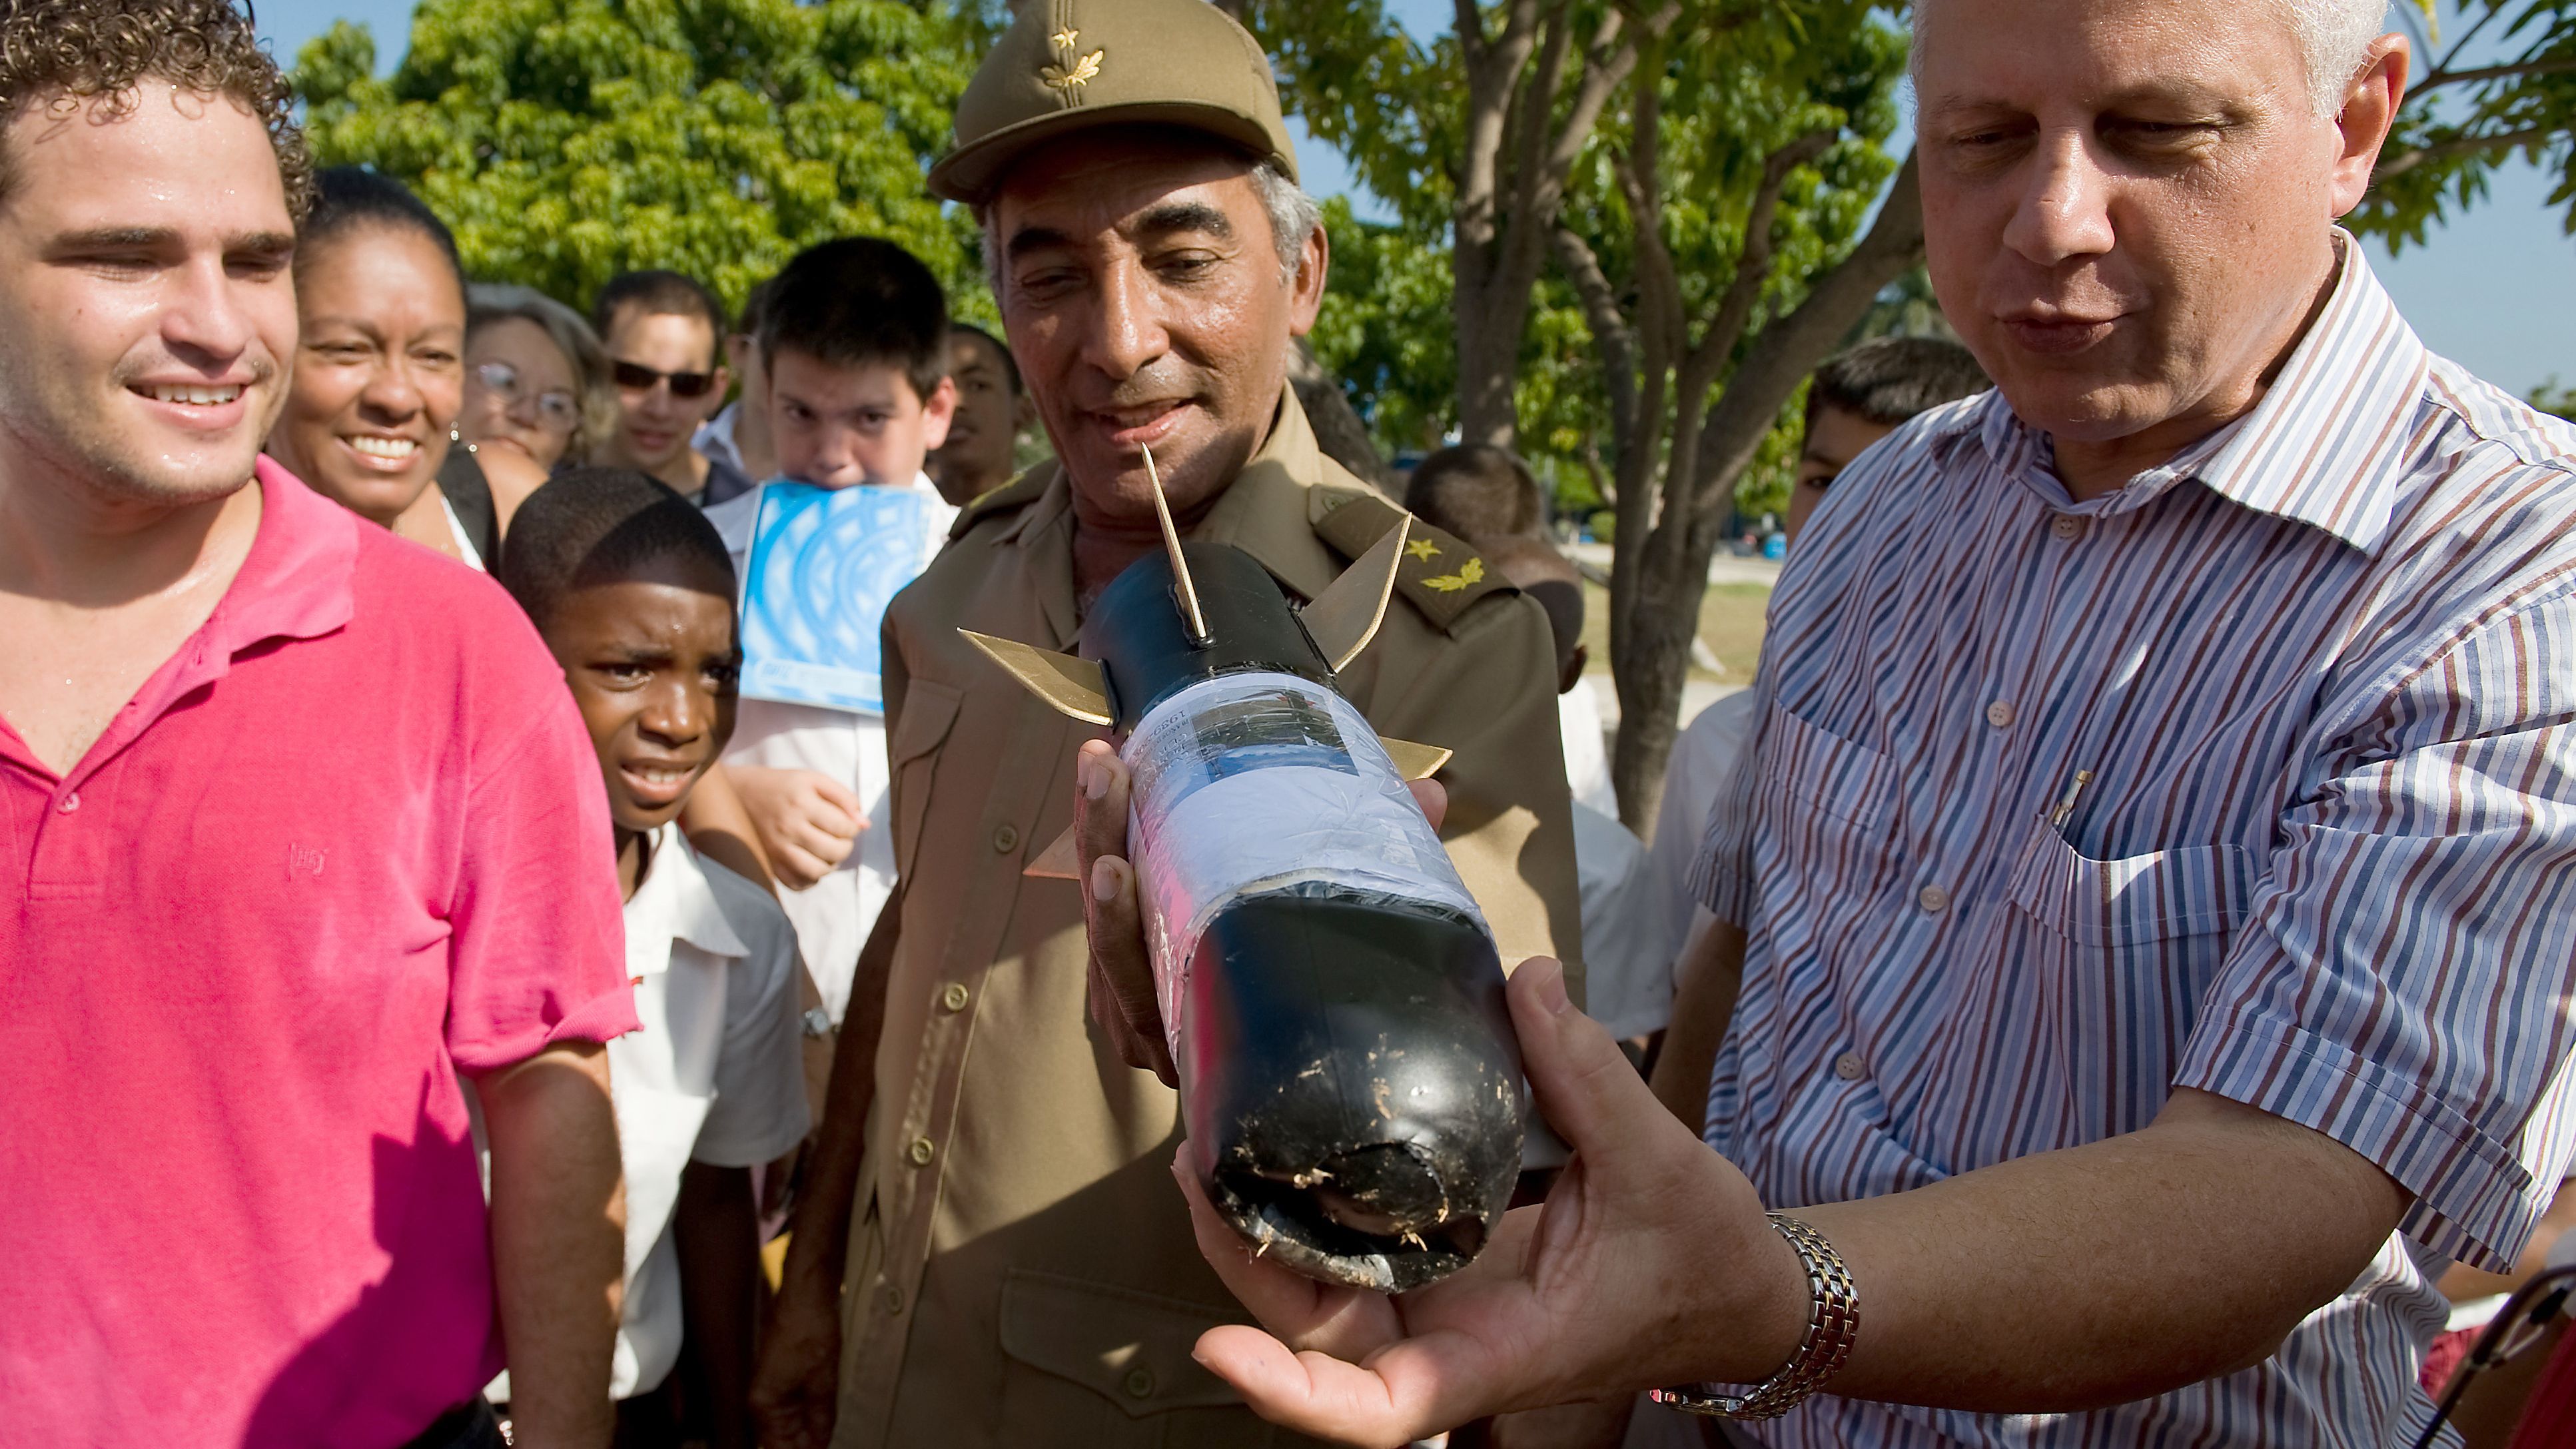 Gen. Arnaldo Tamayo Mendez, center, looks at a homemade rocket in Havana, Cuba, in 2009. Mendez became the first Latin American, the first person of African descent and the first Cuban to fly in space when he flew aboard the Soviet Soyuz 38 on September 18, 1980.